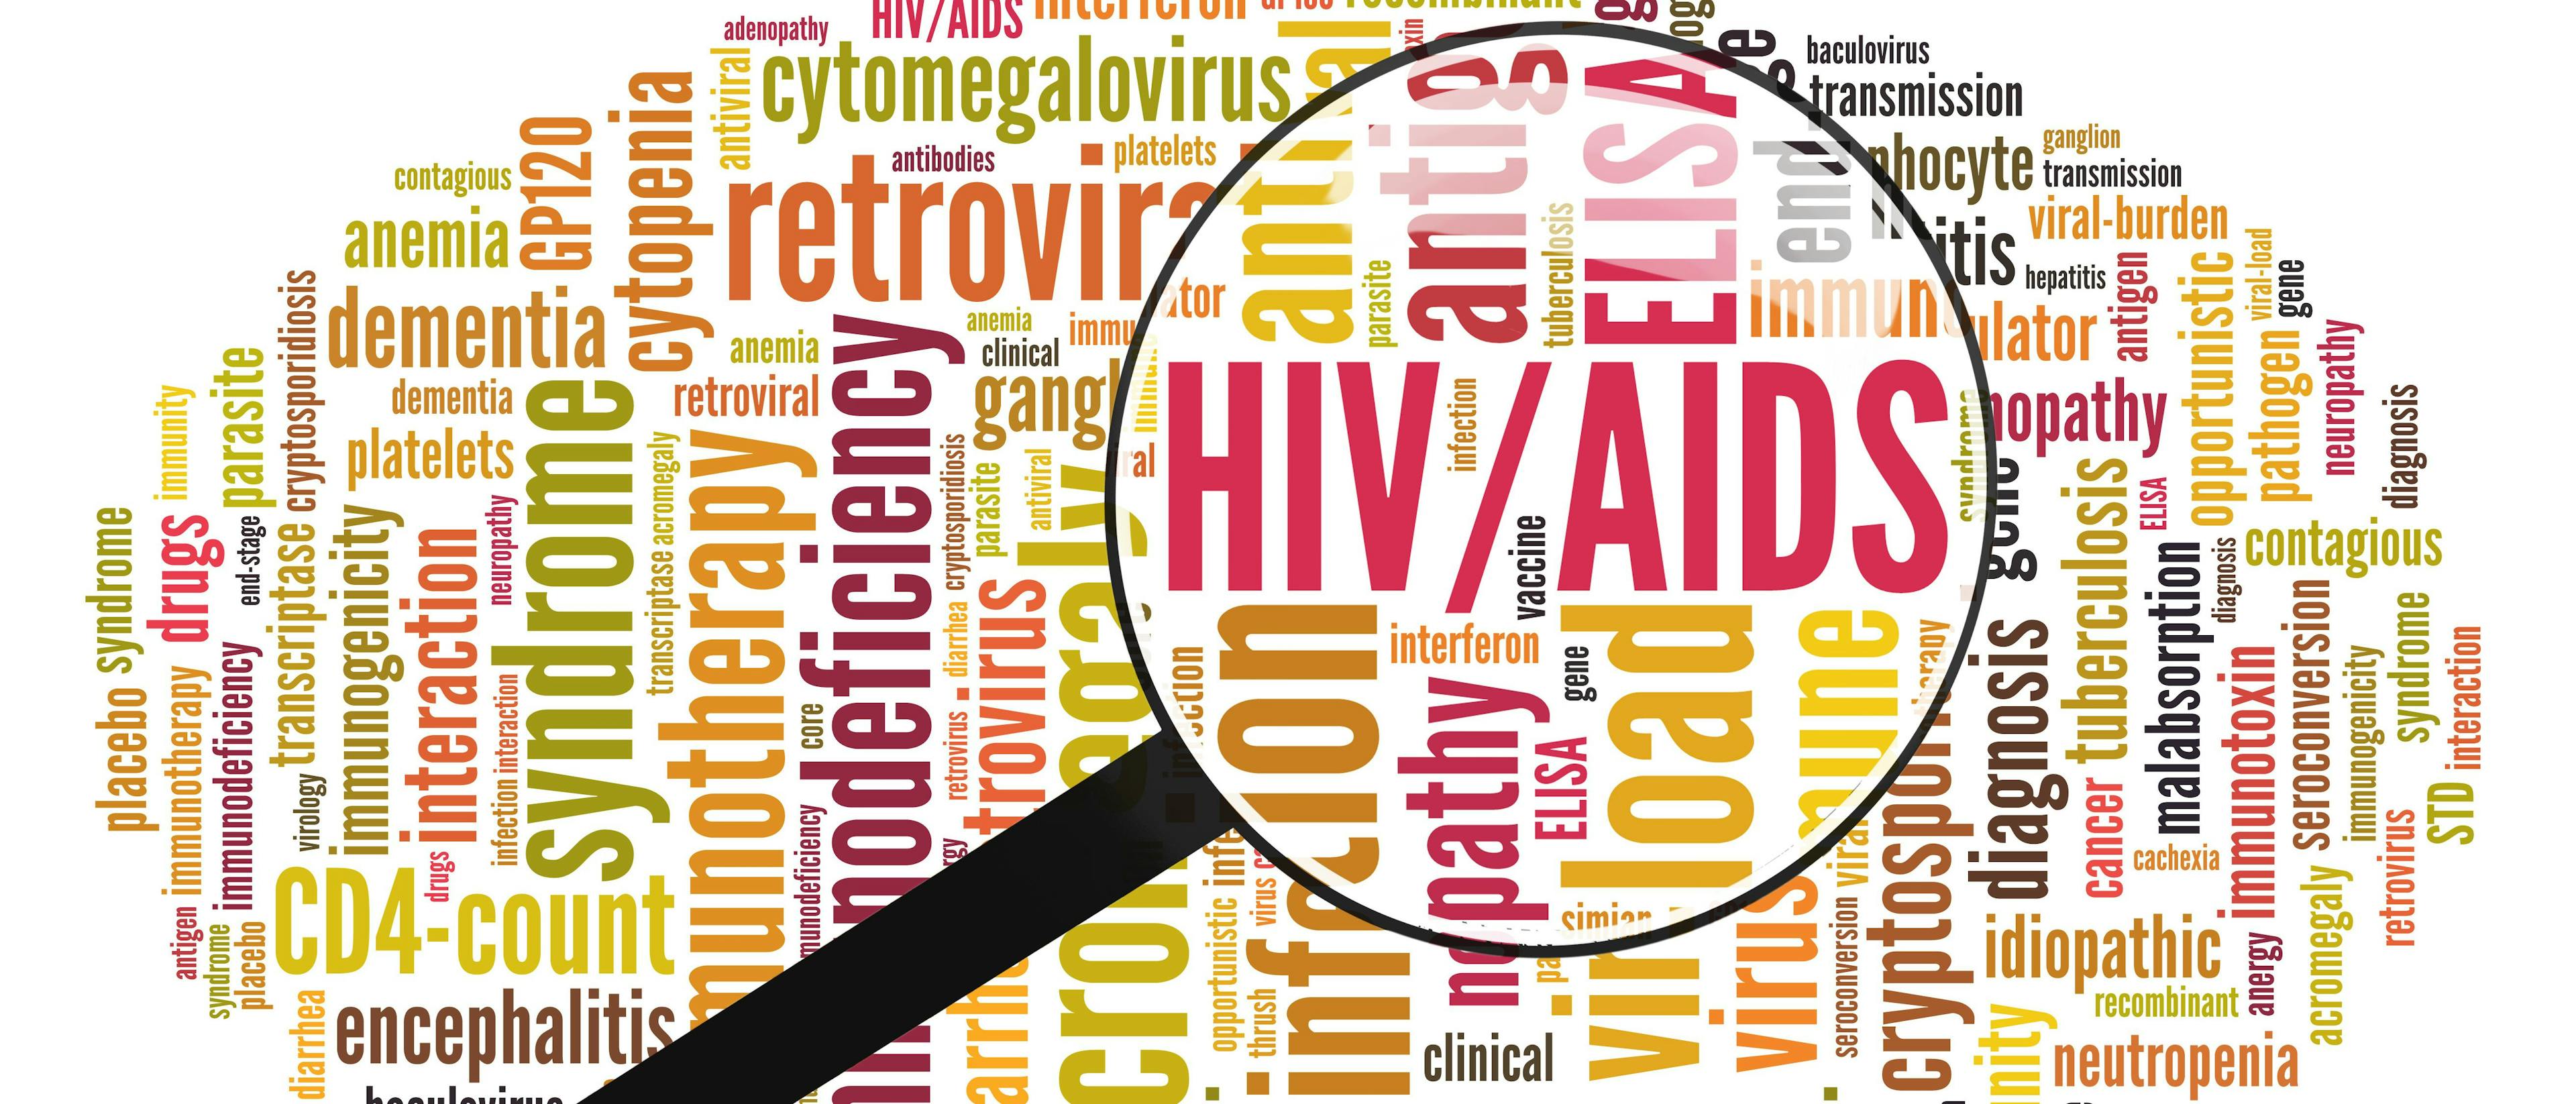 Pharmacists Should Watch for Medication Sharing Among HIV Patients